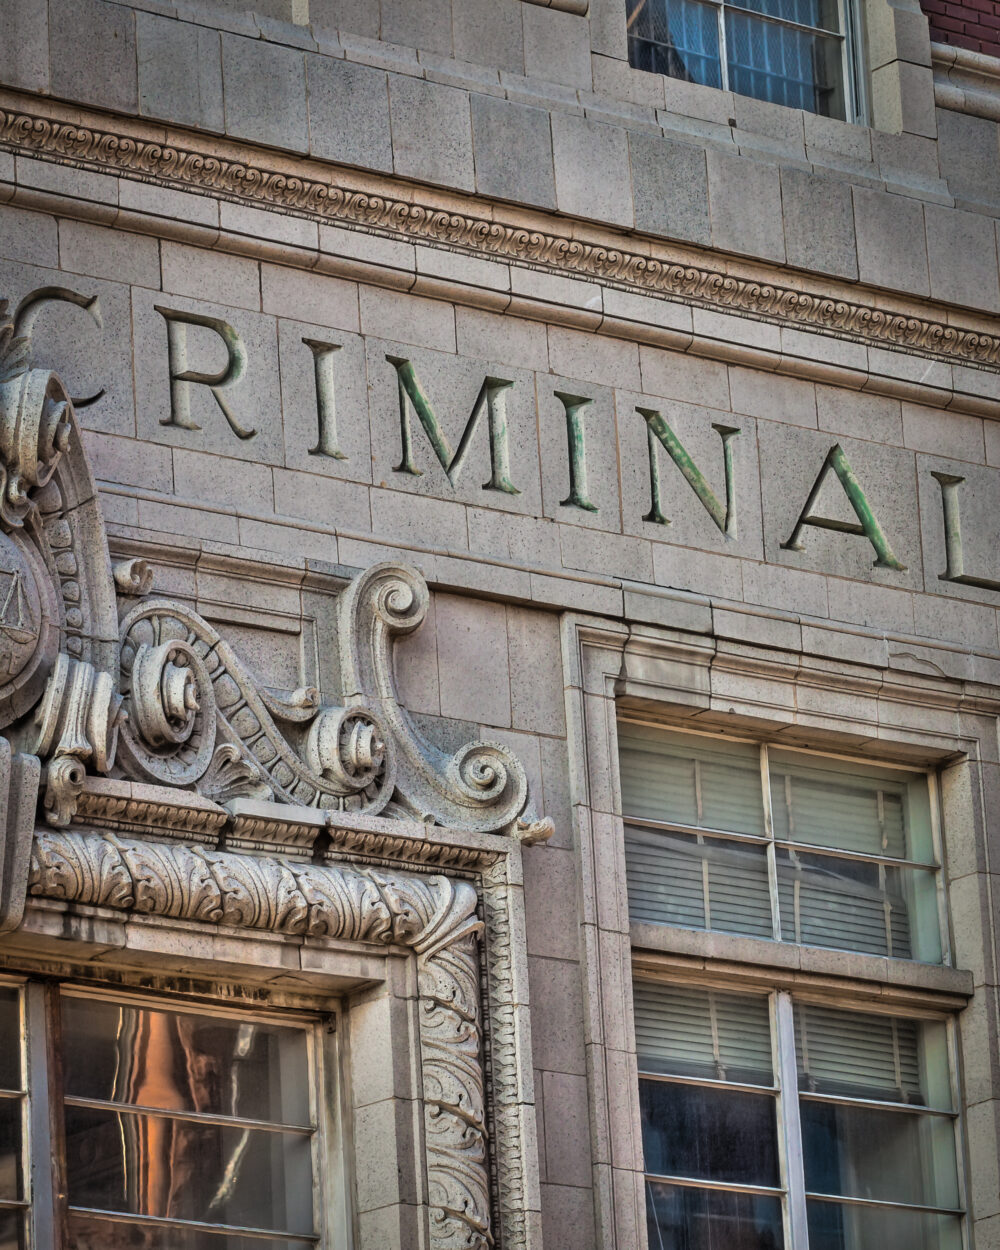 The word "criminal" is engraved on a building.